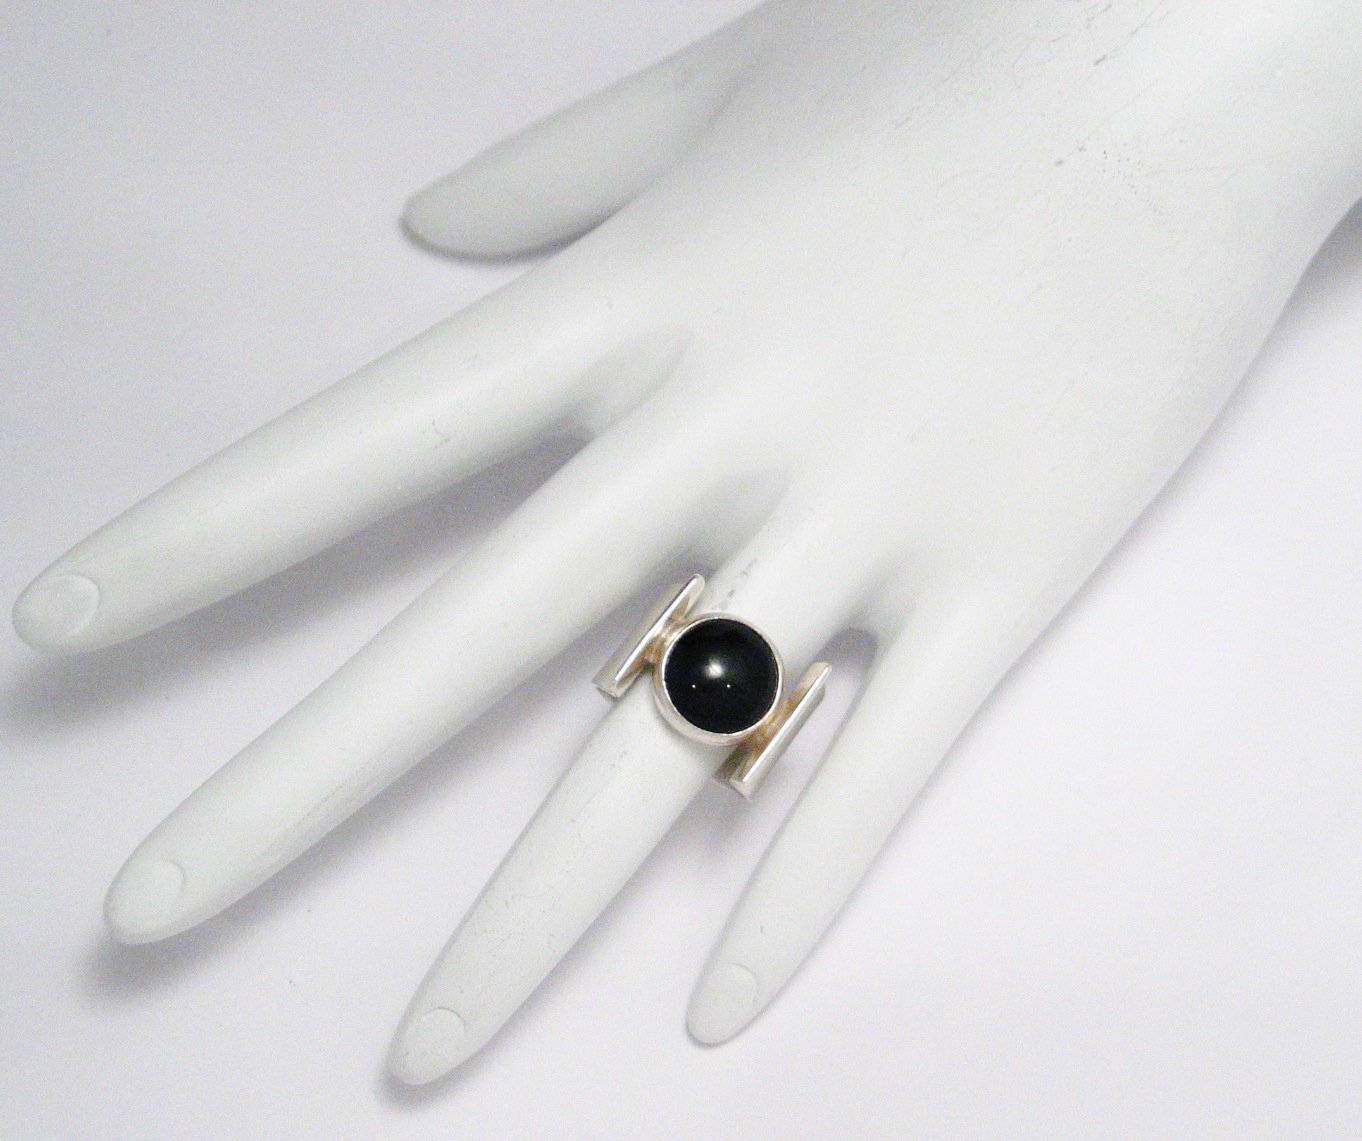 Womenswear Ring | Sterling Silver Floating Jet Black Onyx Stone Ring | Estate Jewelry online at Blingschlingers 